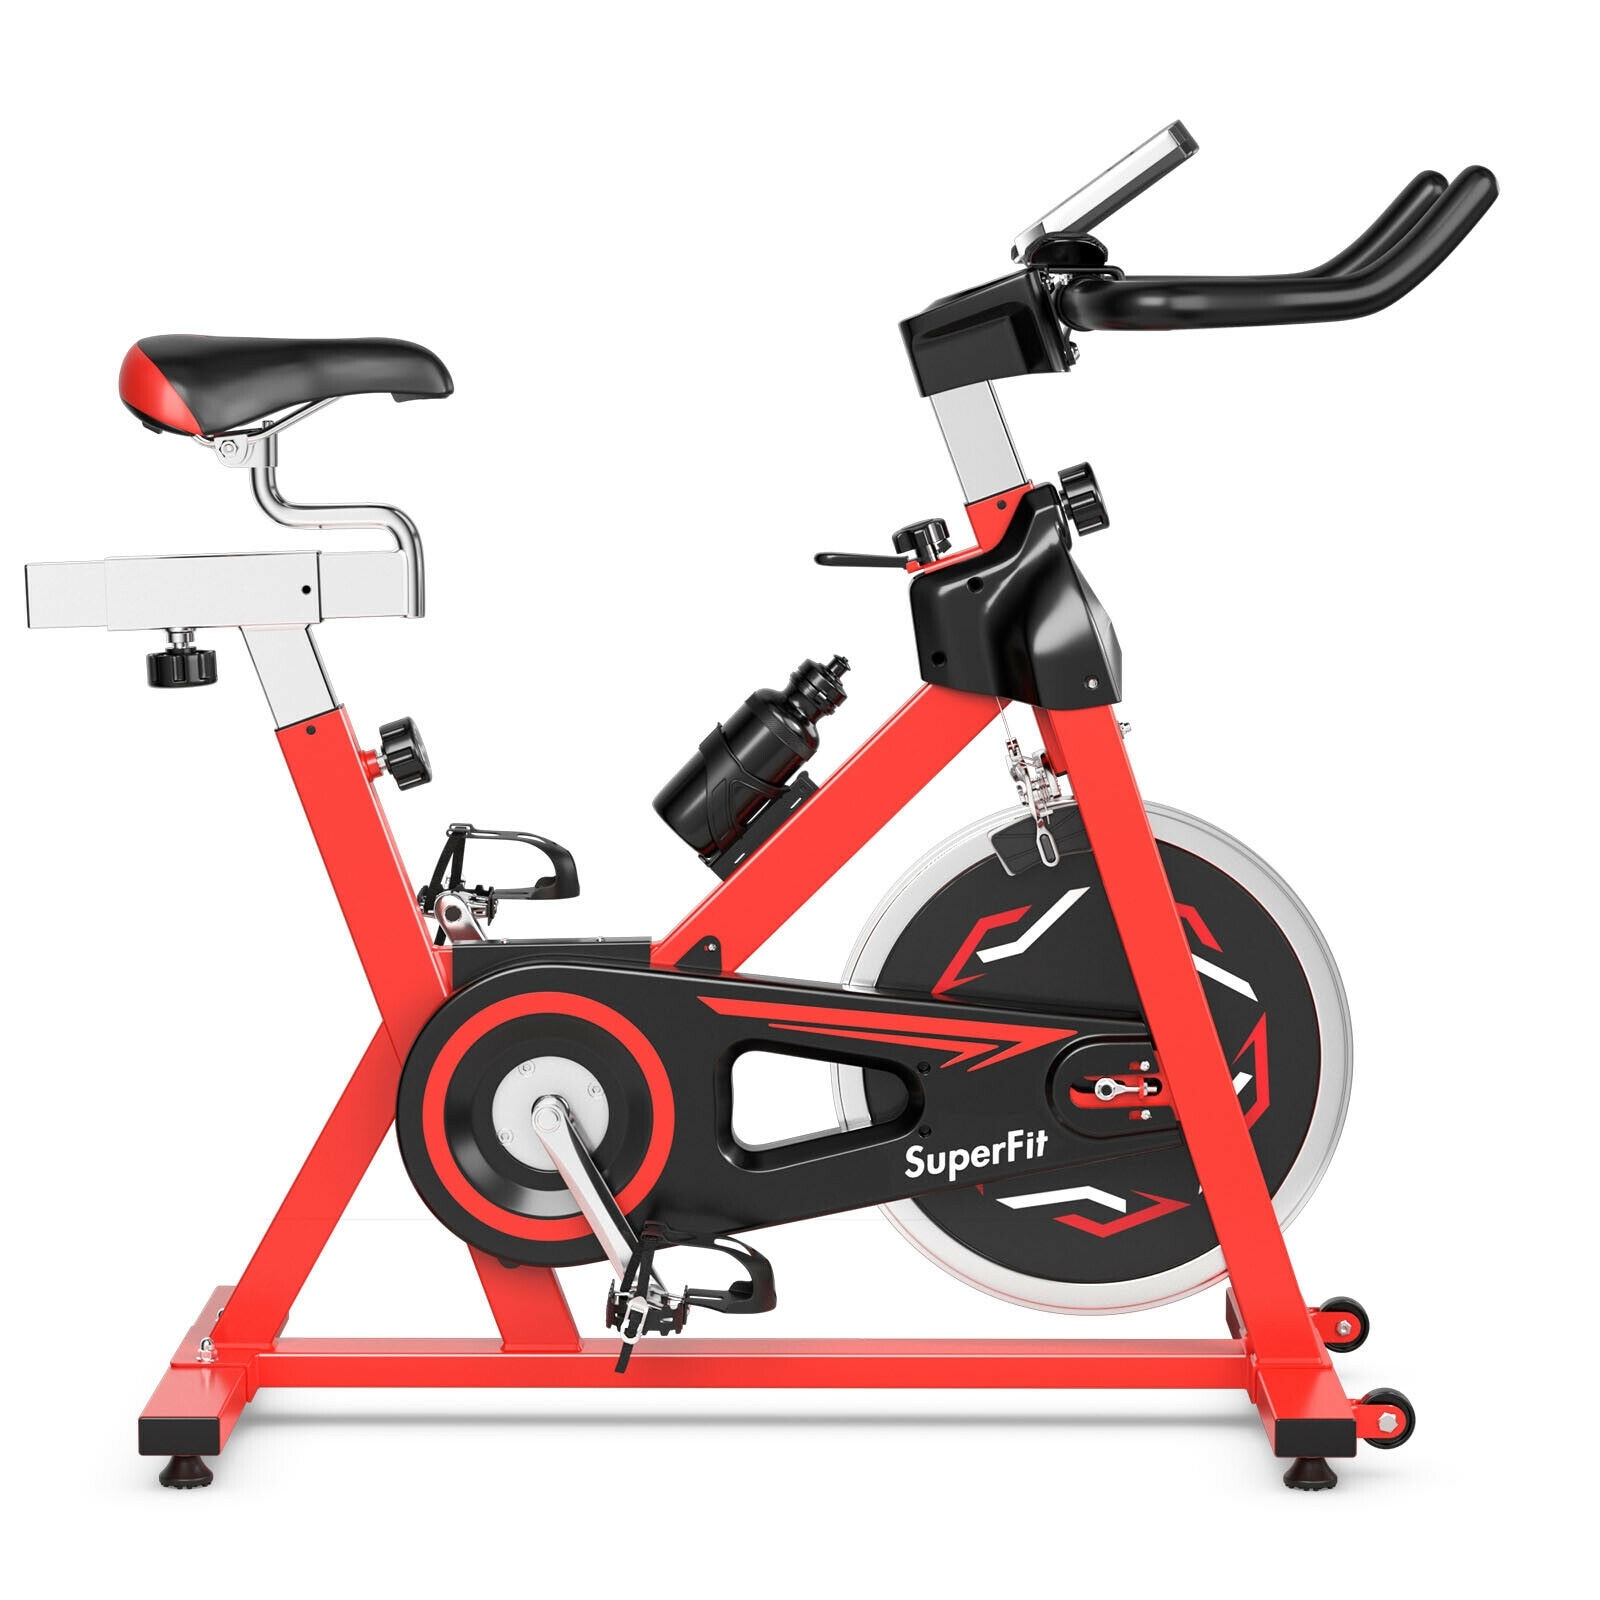 Friction Spin Exercise Bike in Bikes at Lowes.com